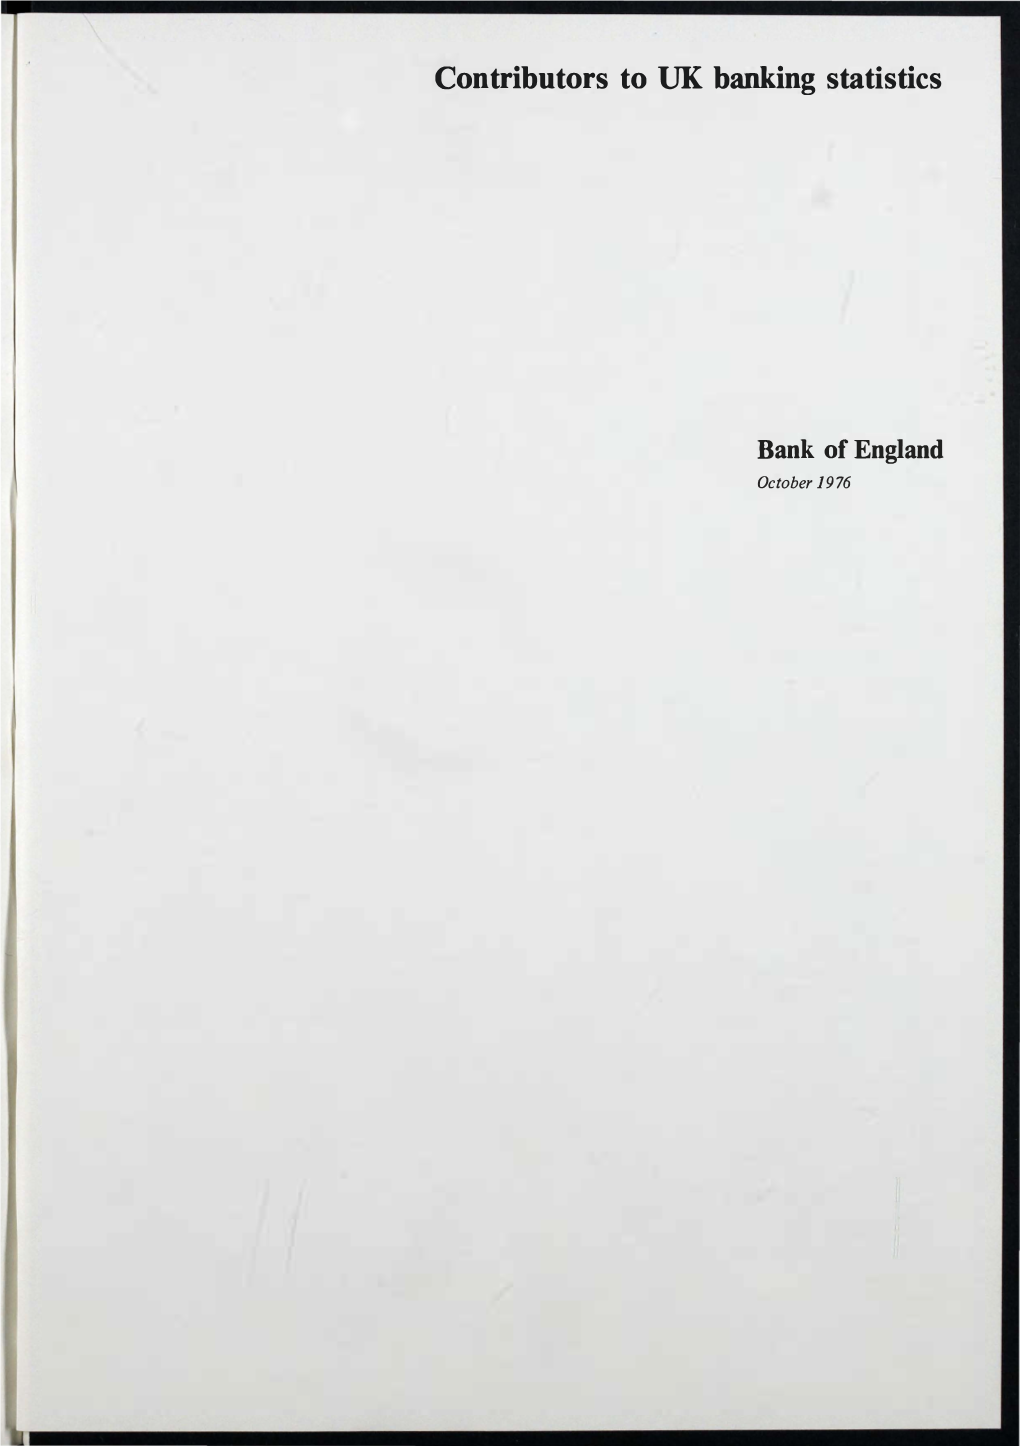 Bank of England October 1976 Contents Henry Ansbacher & Co